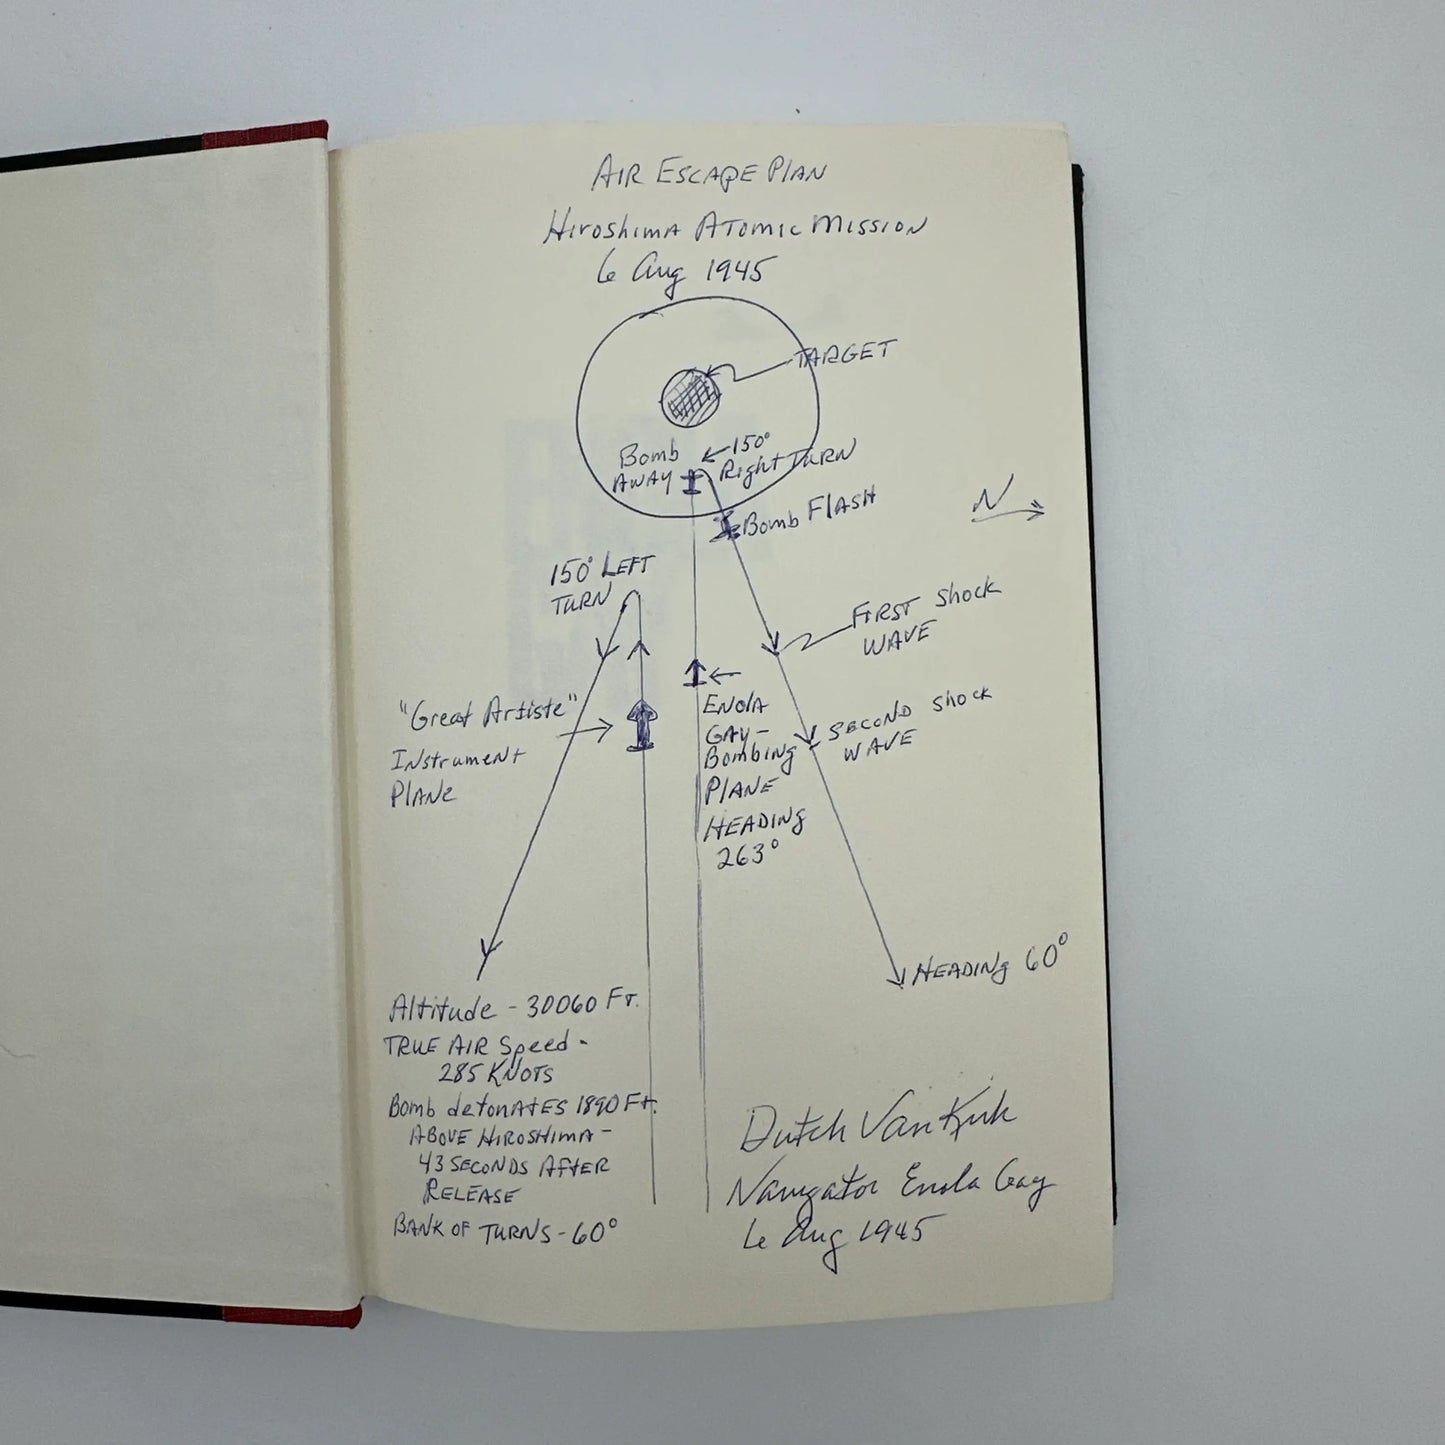 Book on the Enola Gay with a hand-drawn diagram signed by the navigator, Dutch Van Kirk